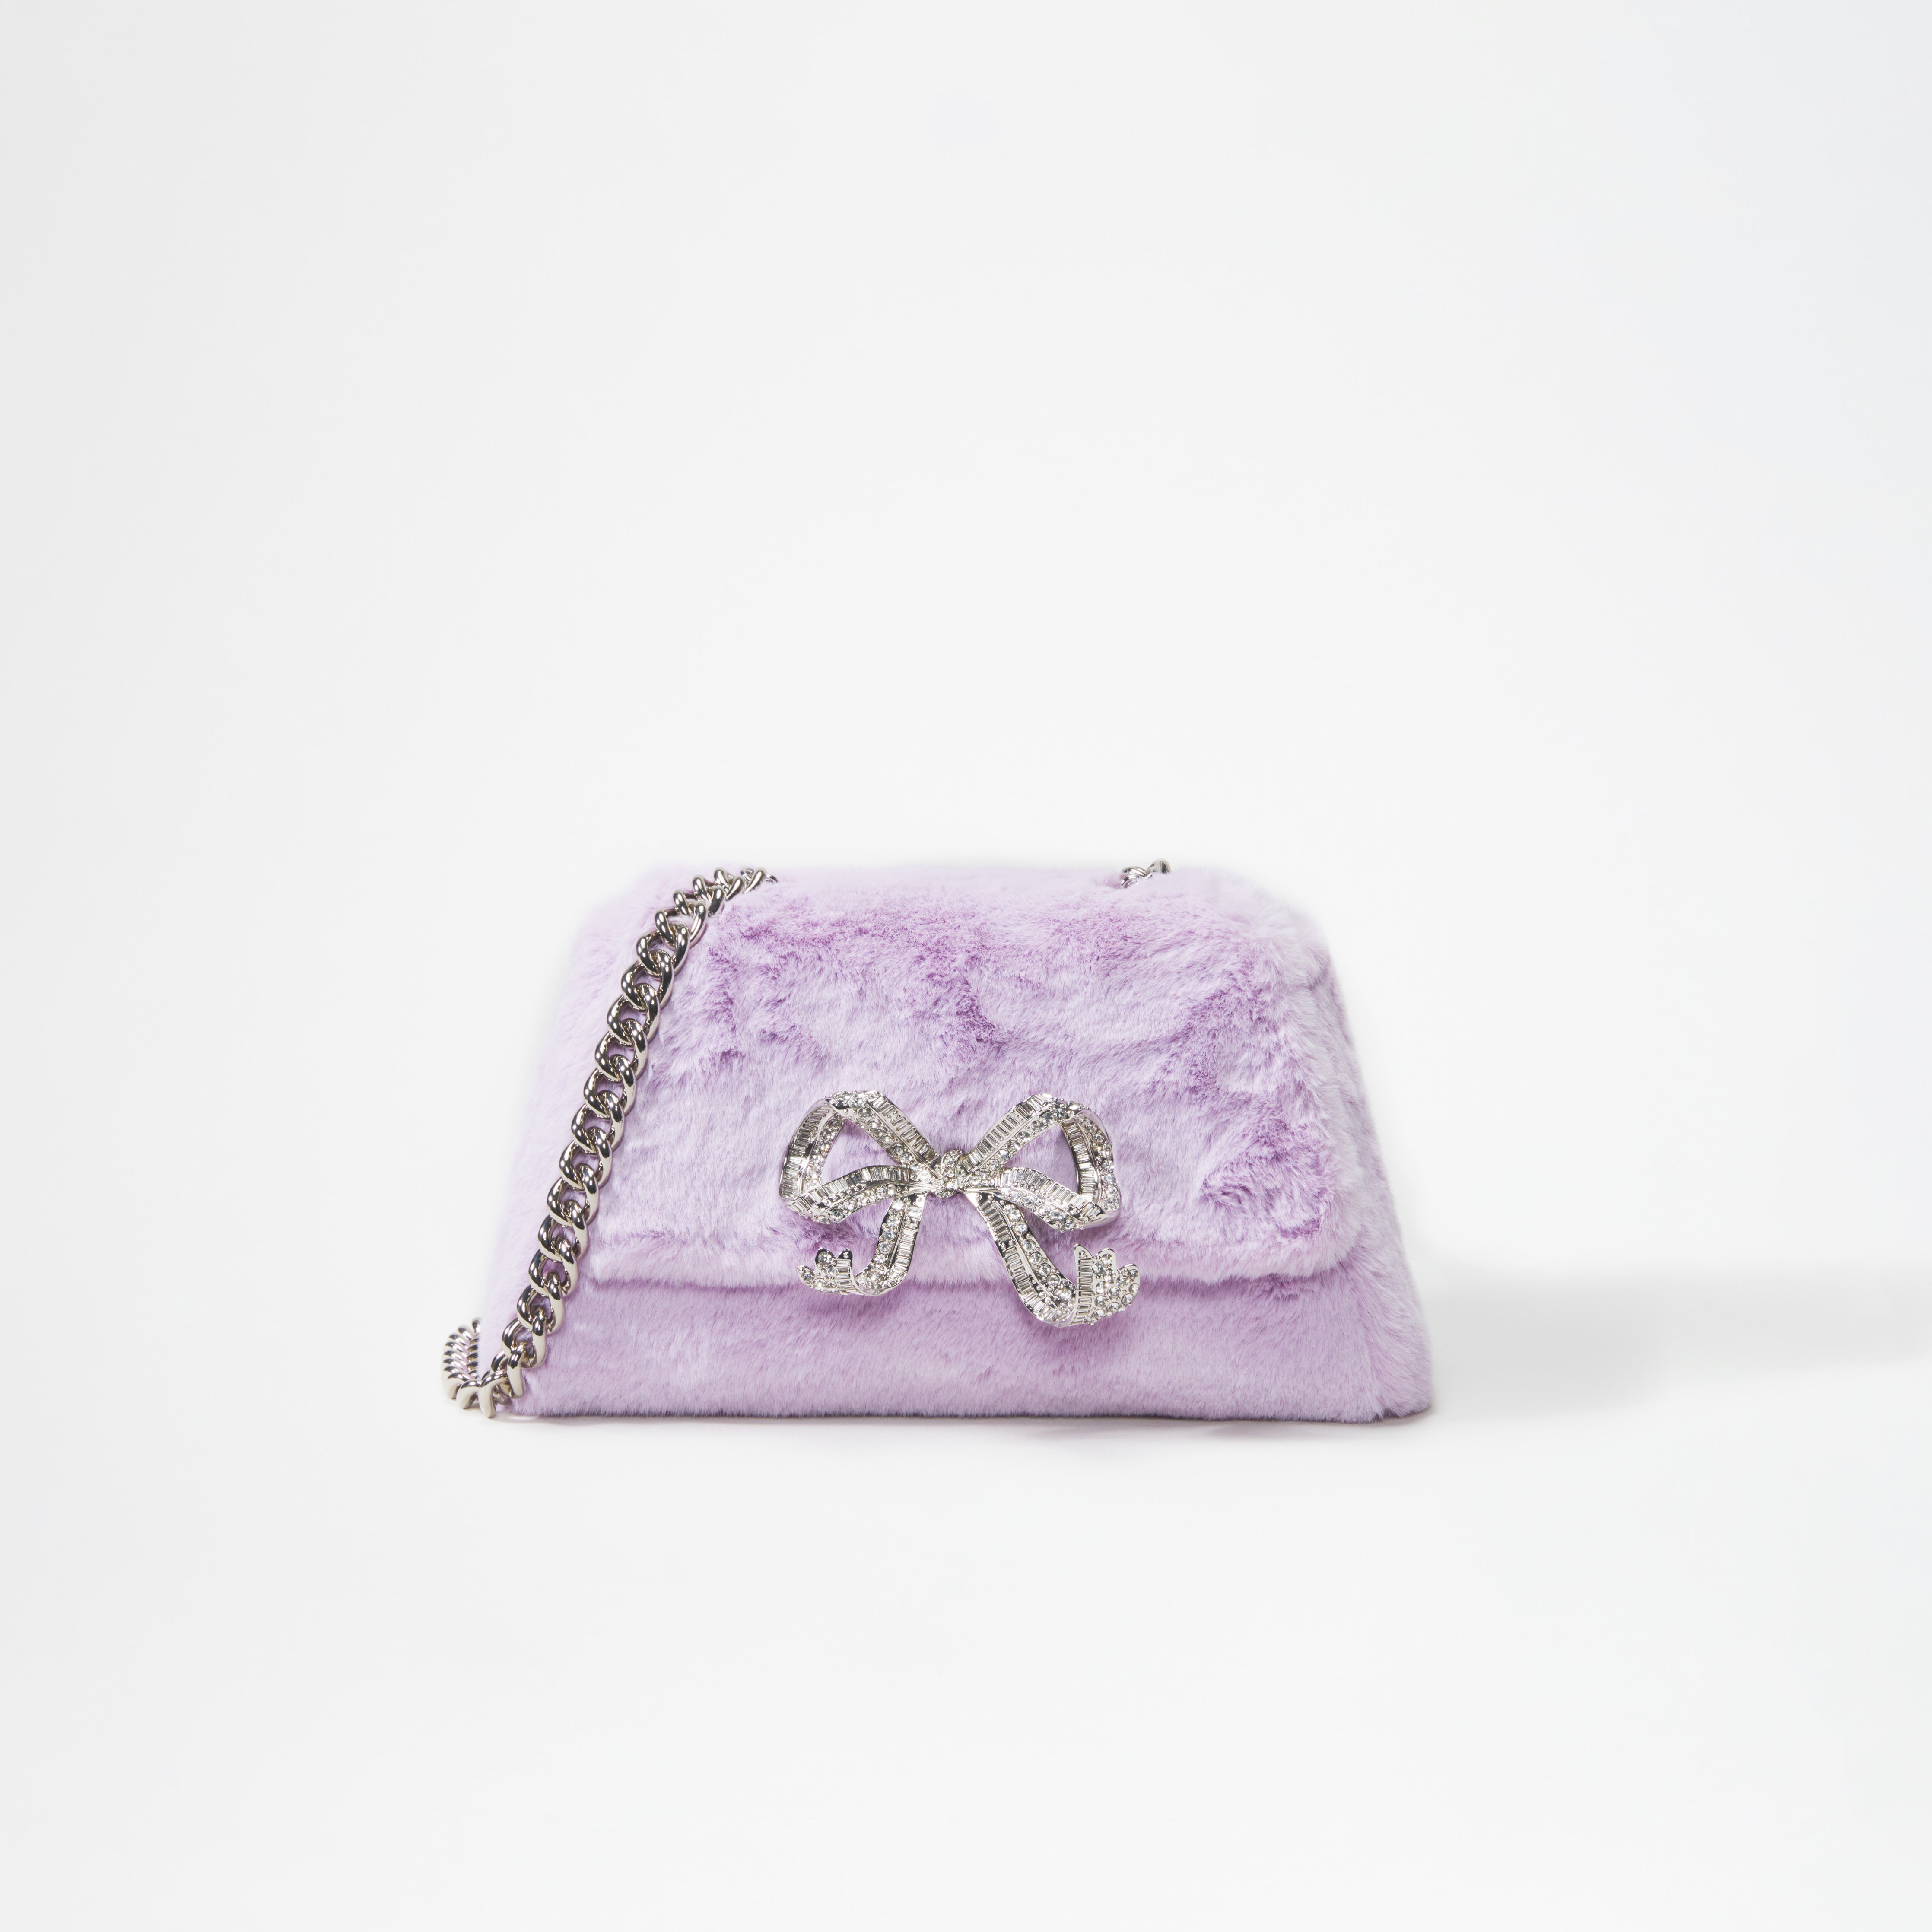 Nicola Faux Fur Clutch with Chain Strap